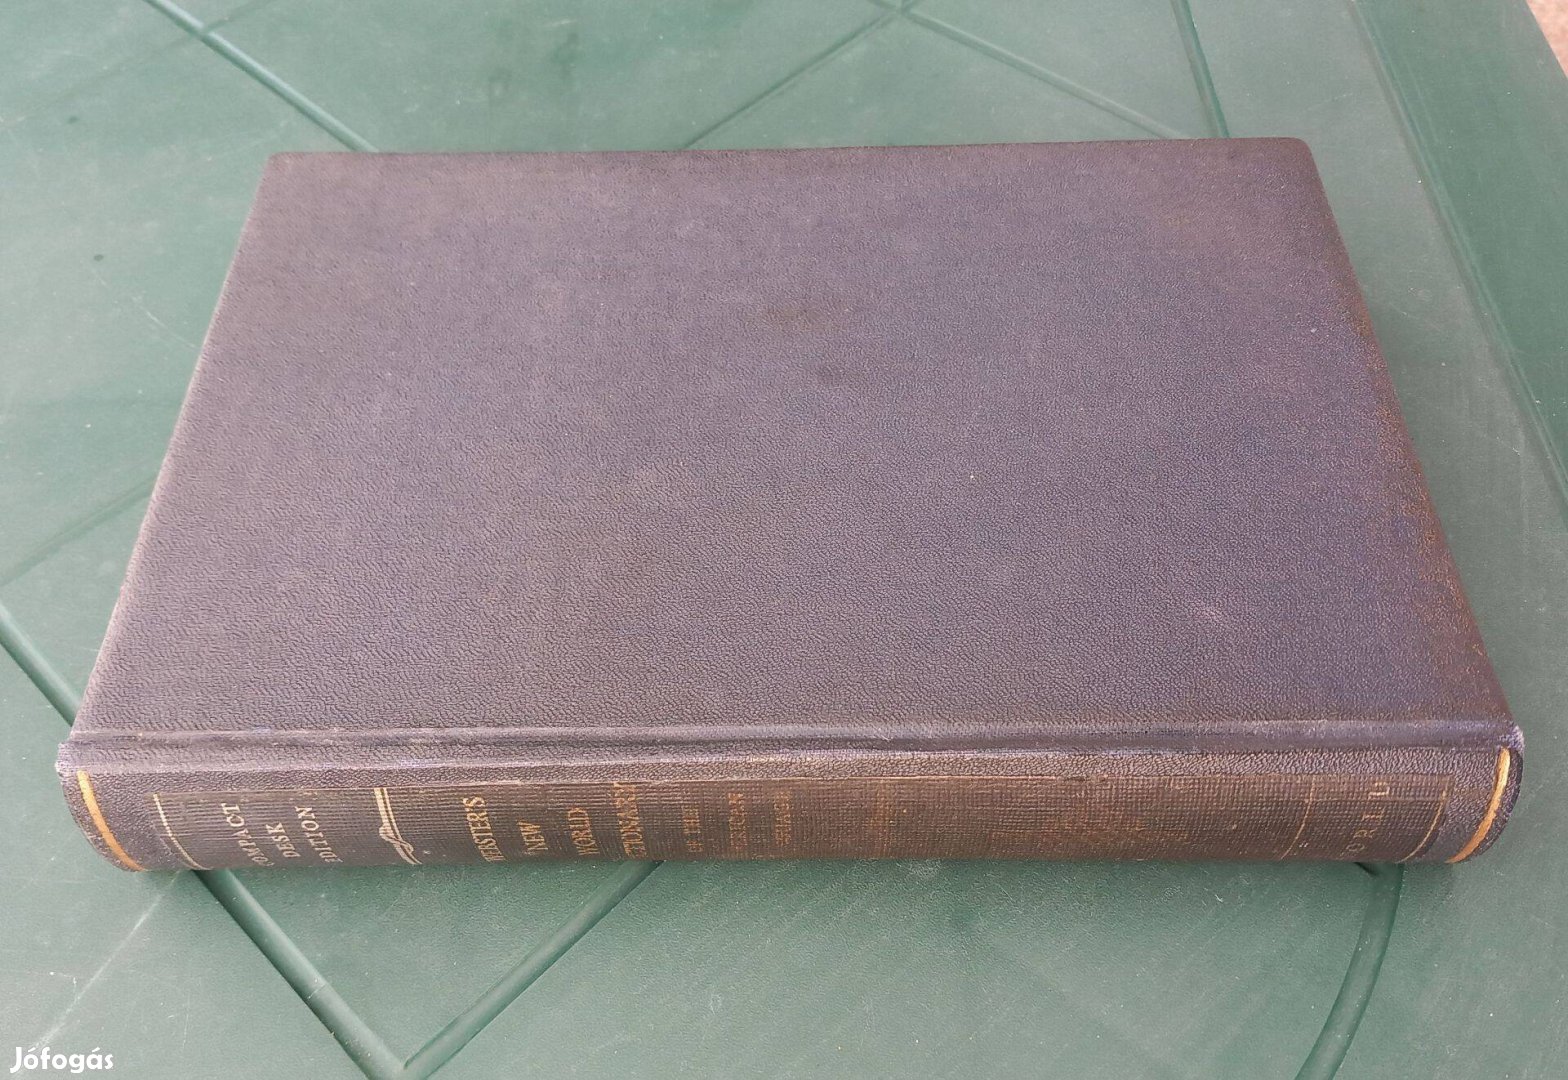 Webster's New World Dictionary of the American Language 1963